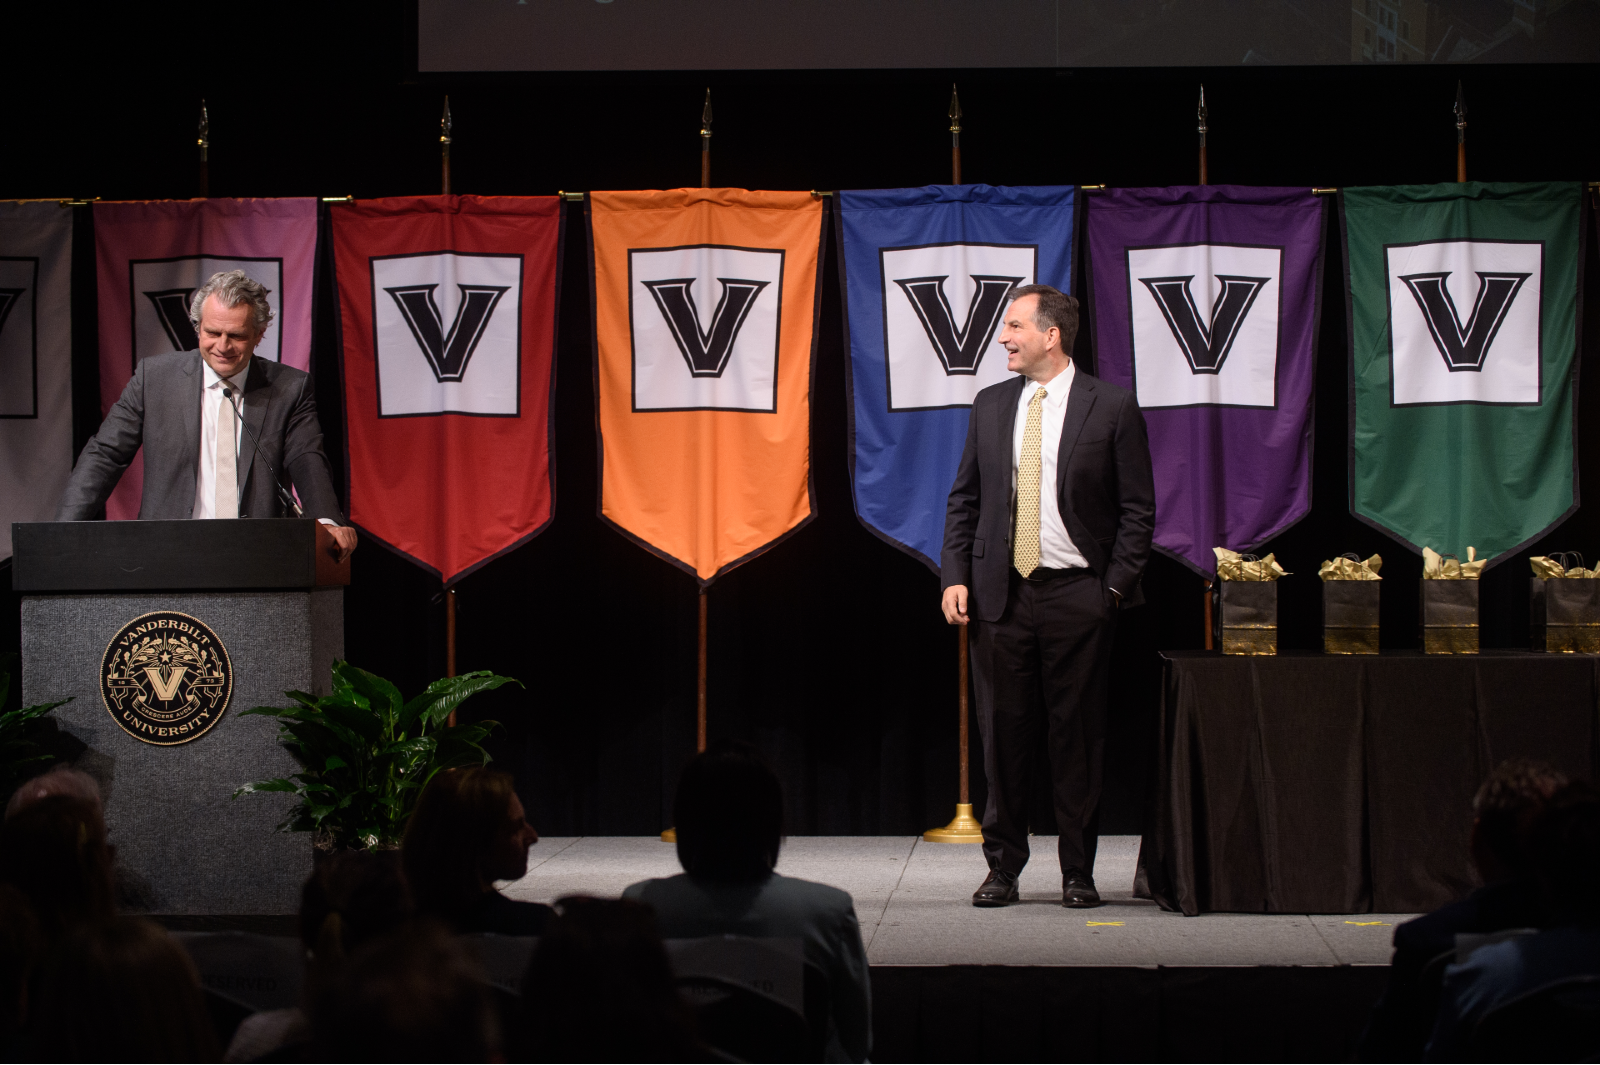 Chancellor Daniel Diermeier at podium assisted by Vice Chancellor Eric Kopstain for staff awards presentation